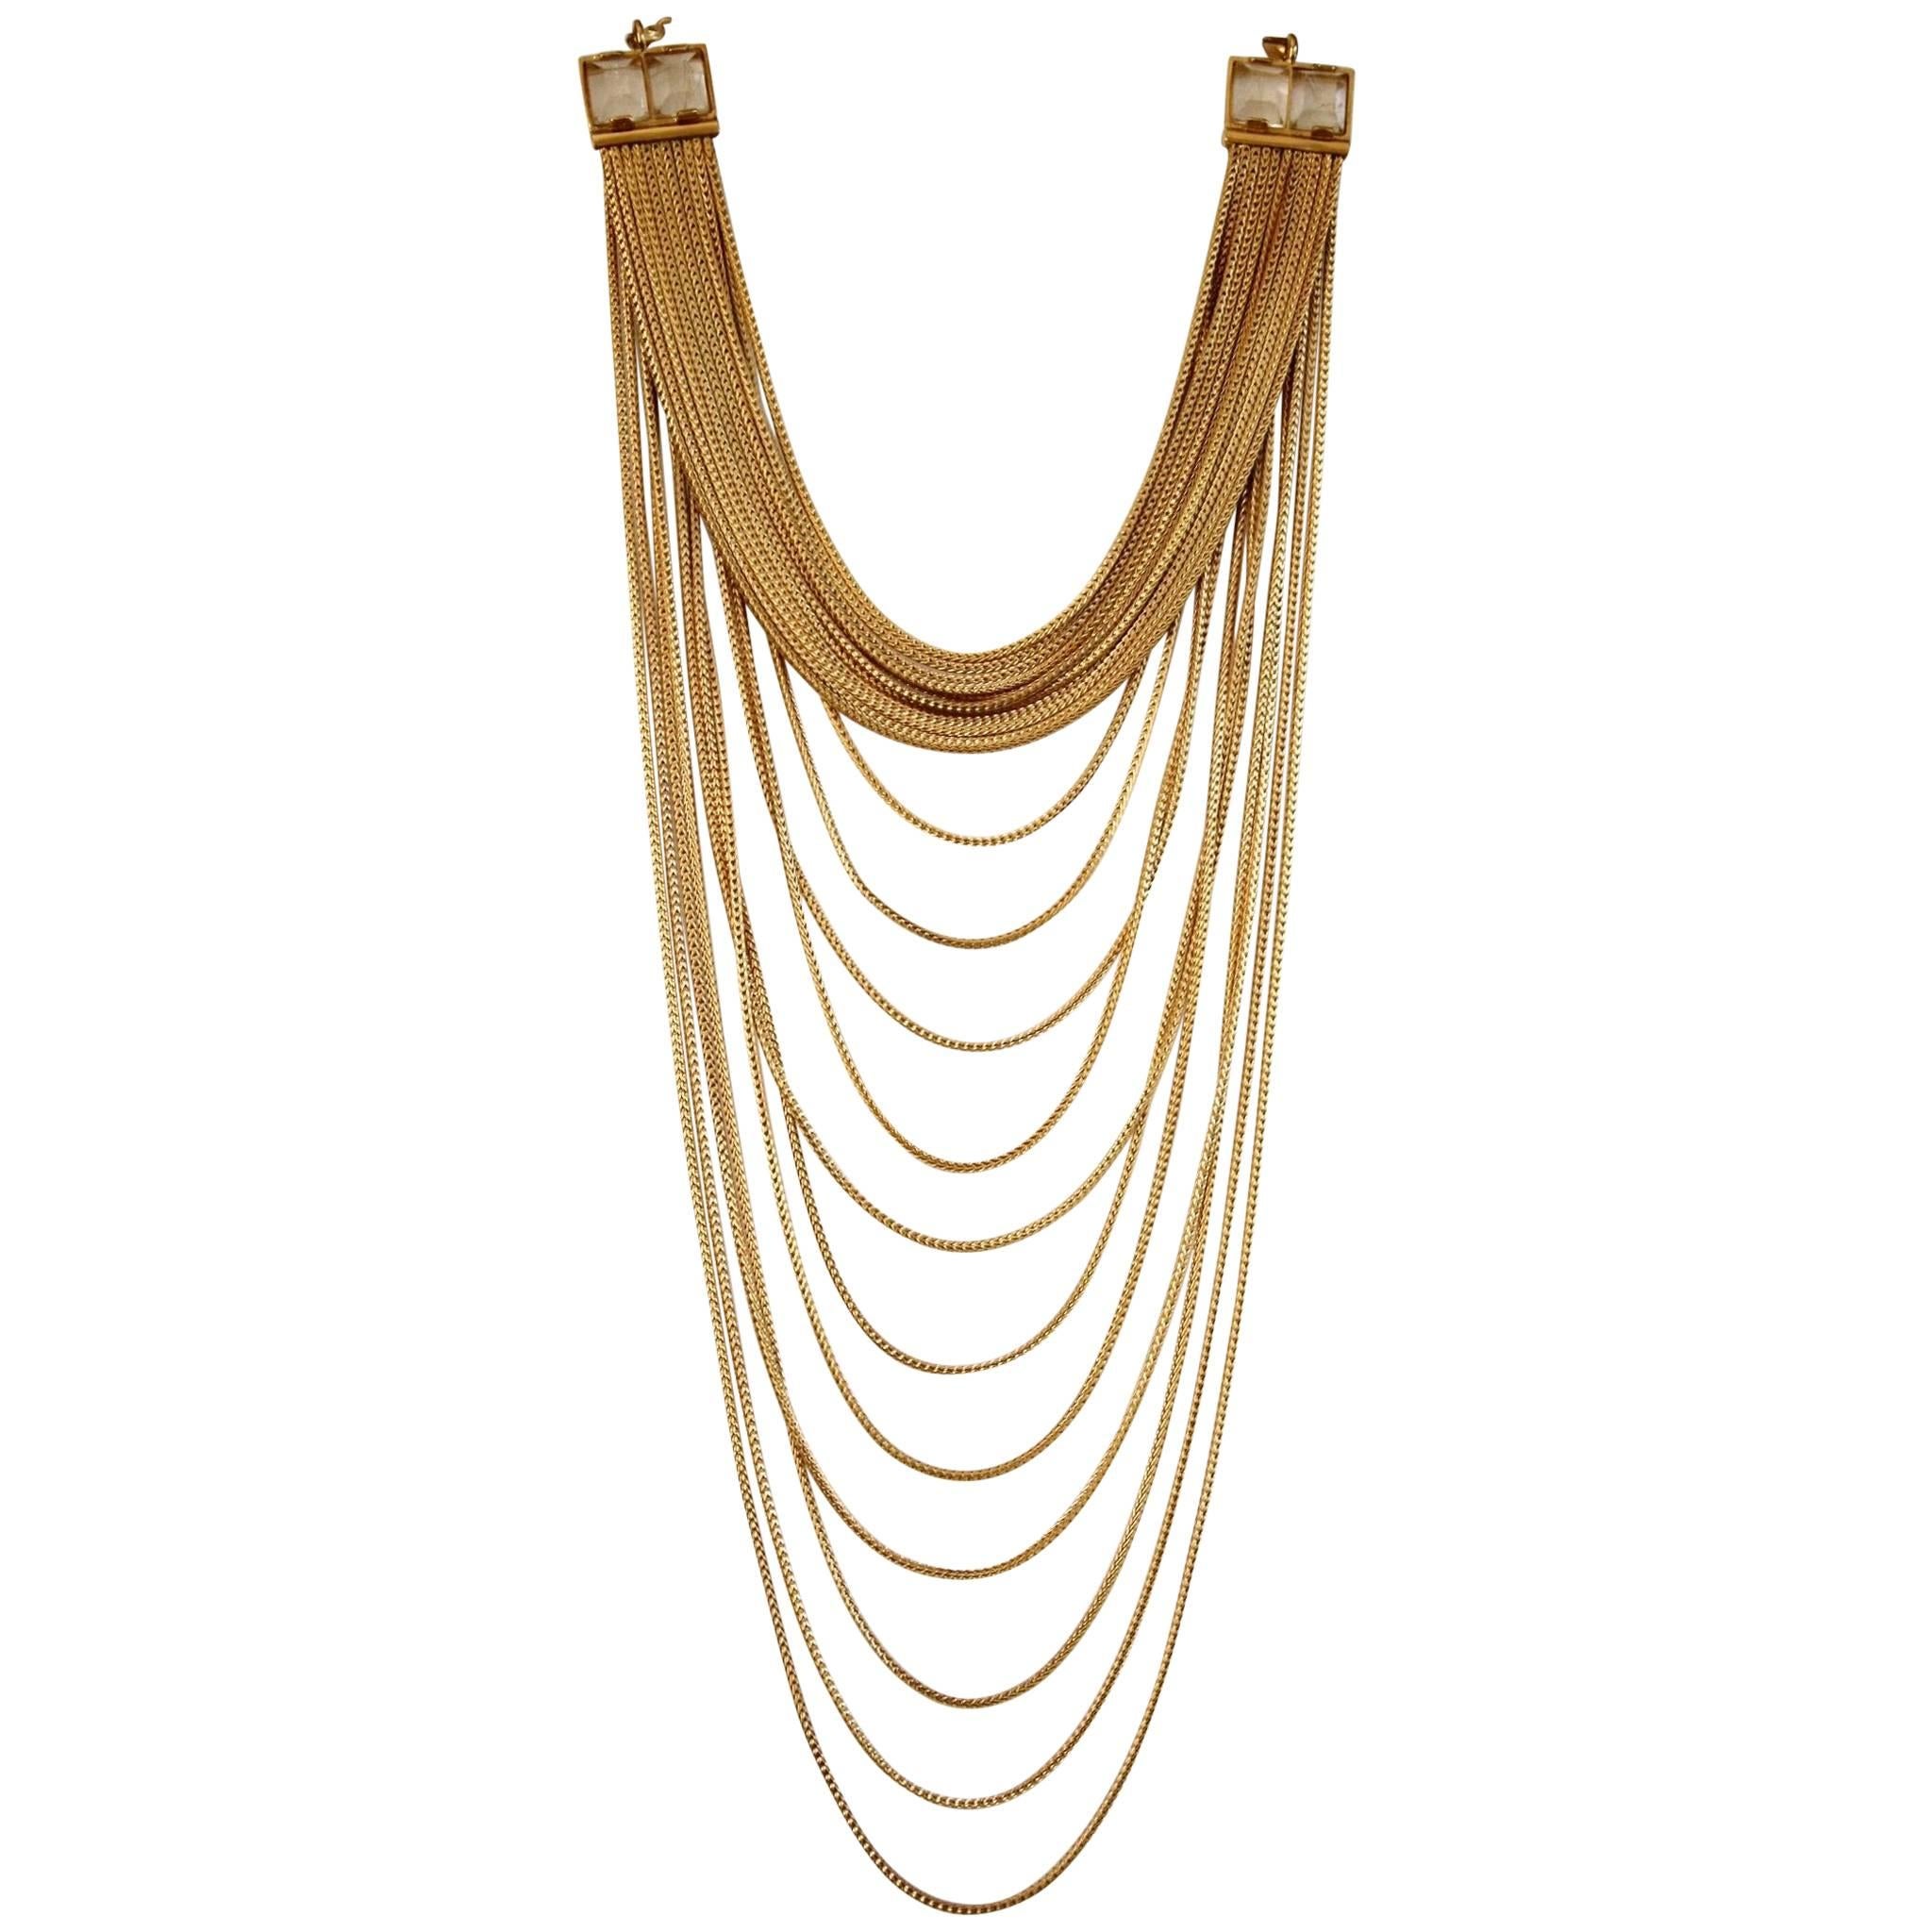 Goossens Paris Origines Gilded Brass and Rock Crystal Multi Chain Necklace